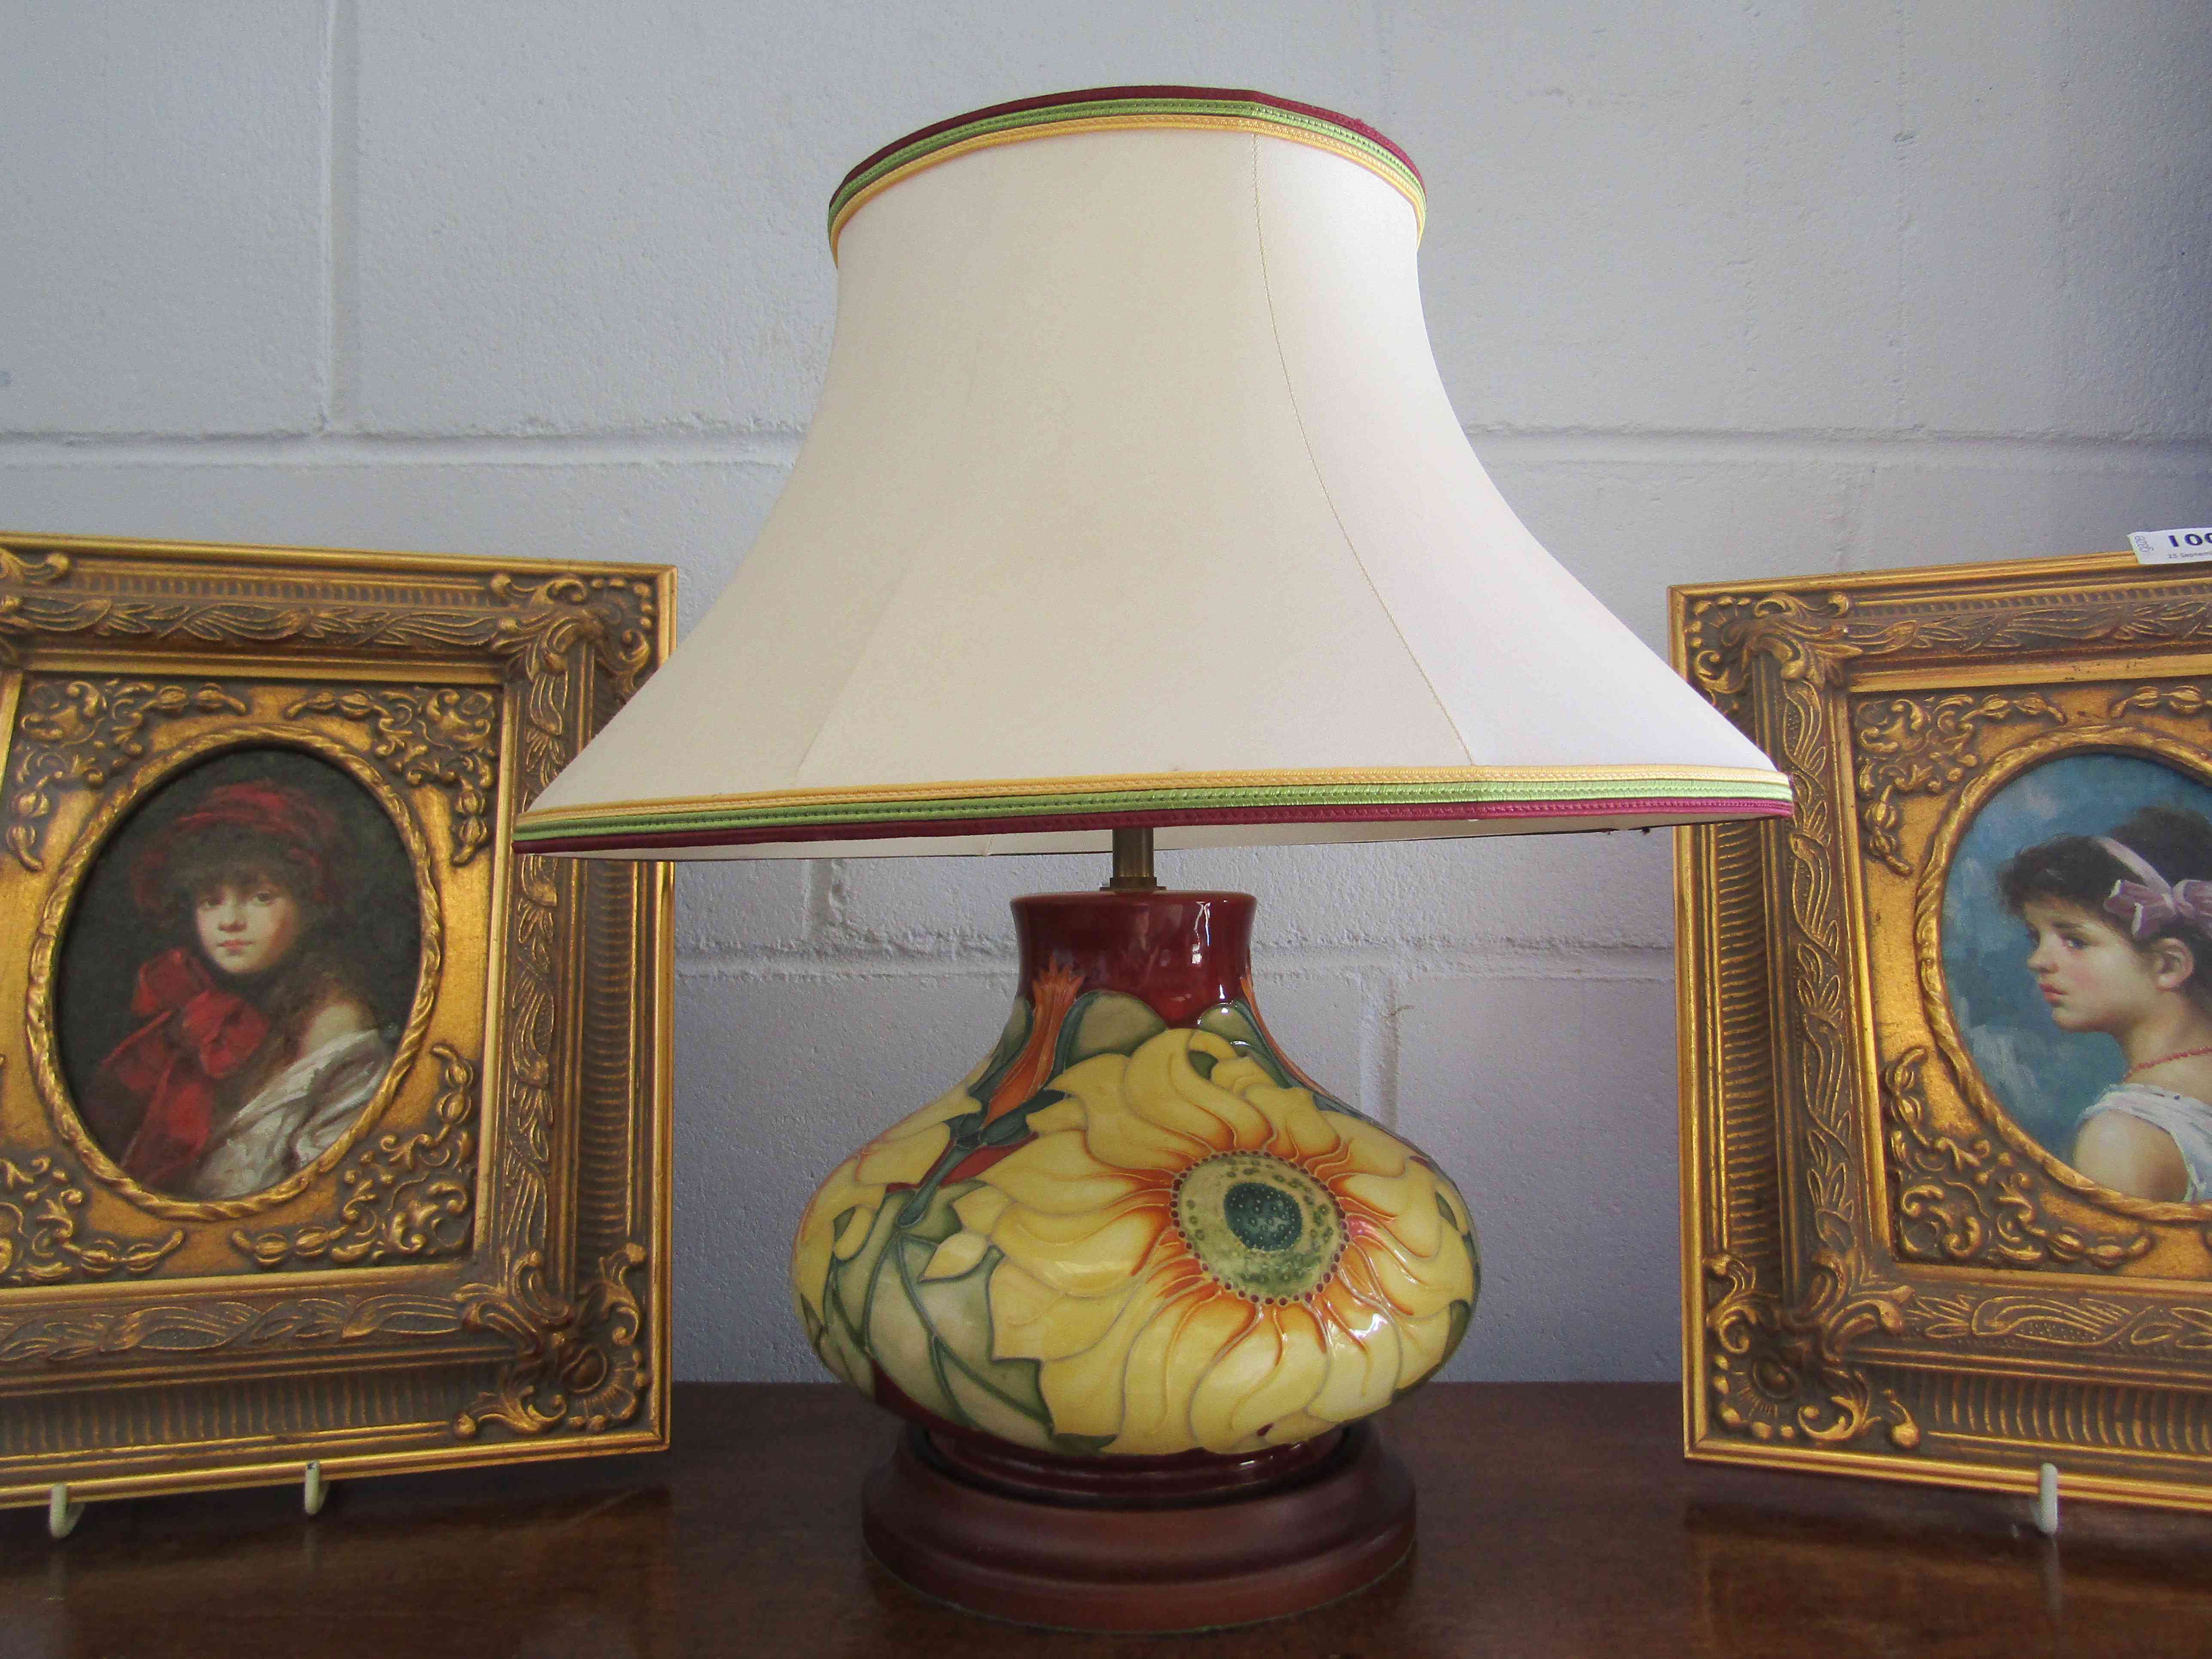 A Moorcroft table lamp with 'Sunflower' design on base and dated 13.5.